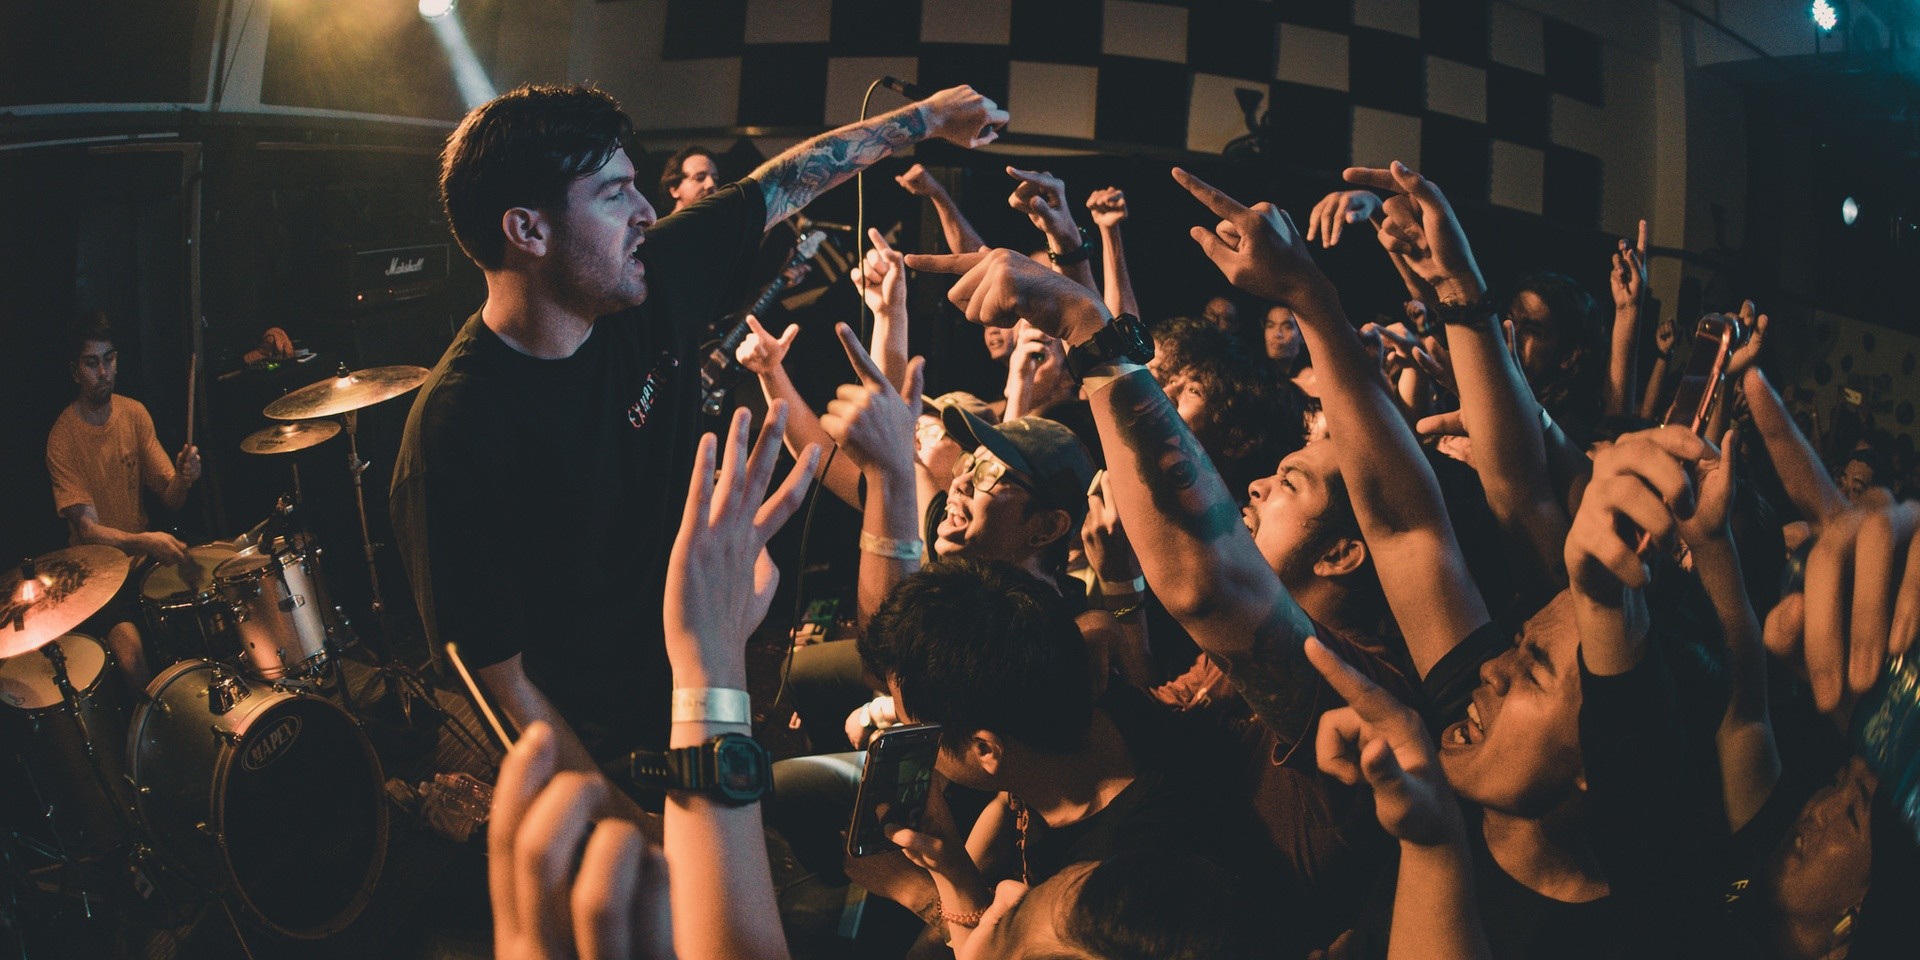 A jubilant night of hardcore with Counterparts and Stray From The Path - gig report